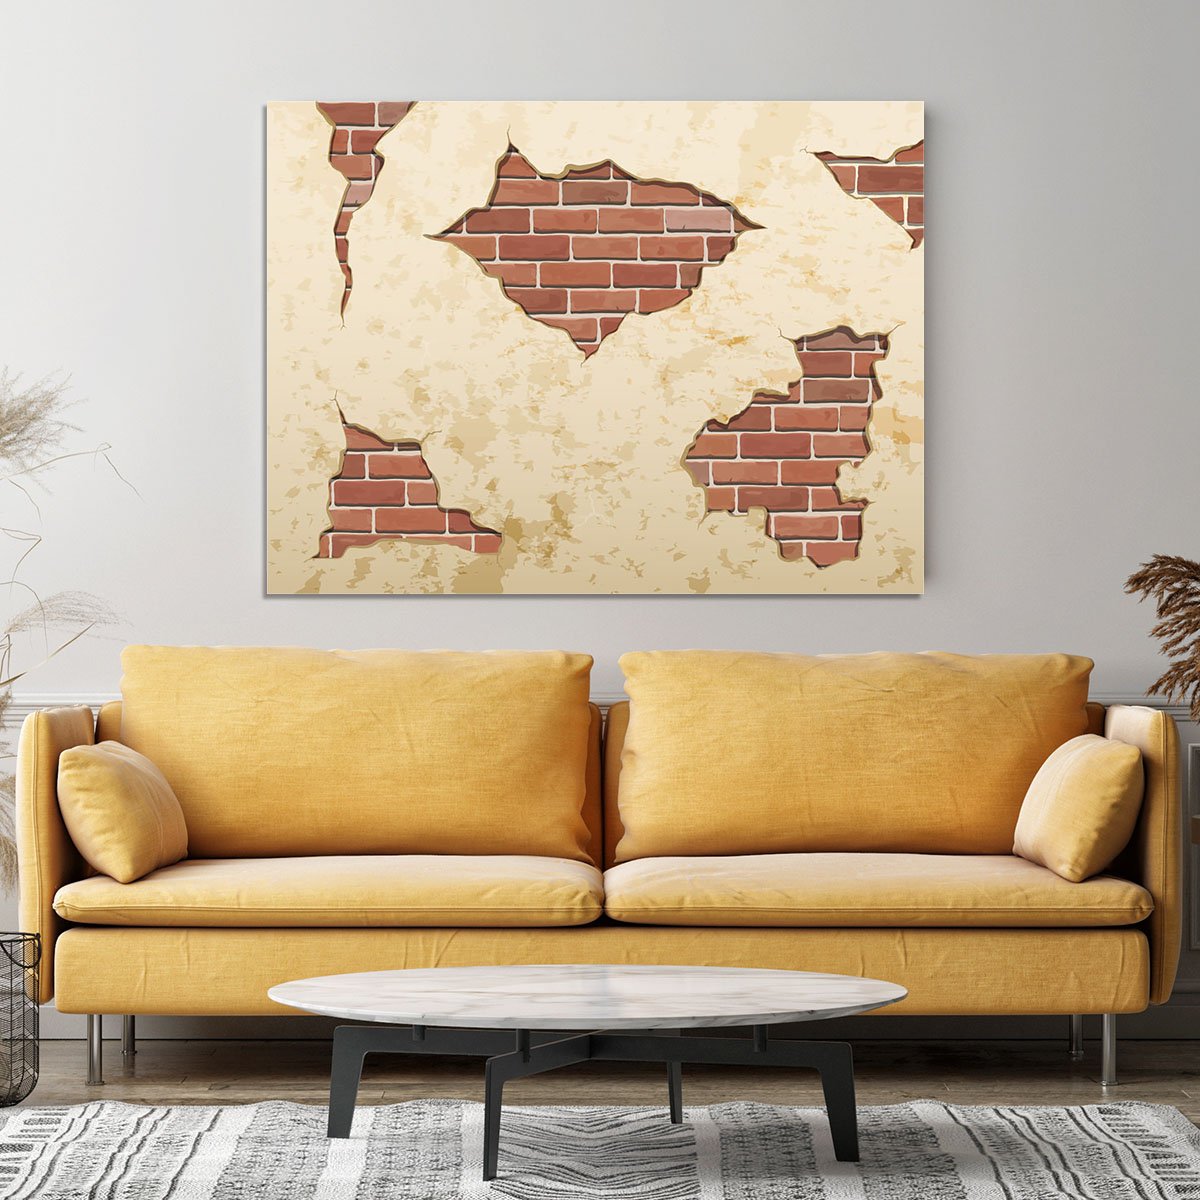 The old shabby concrete and brick cracks Canvas Print or Poster